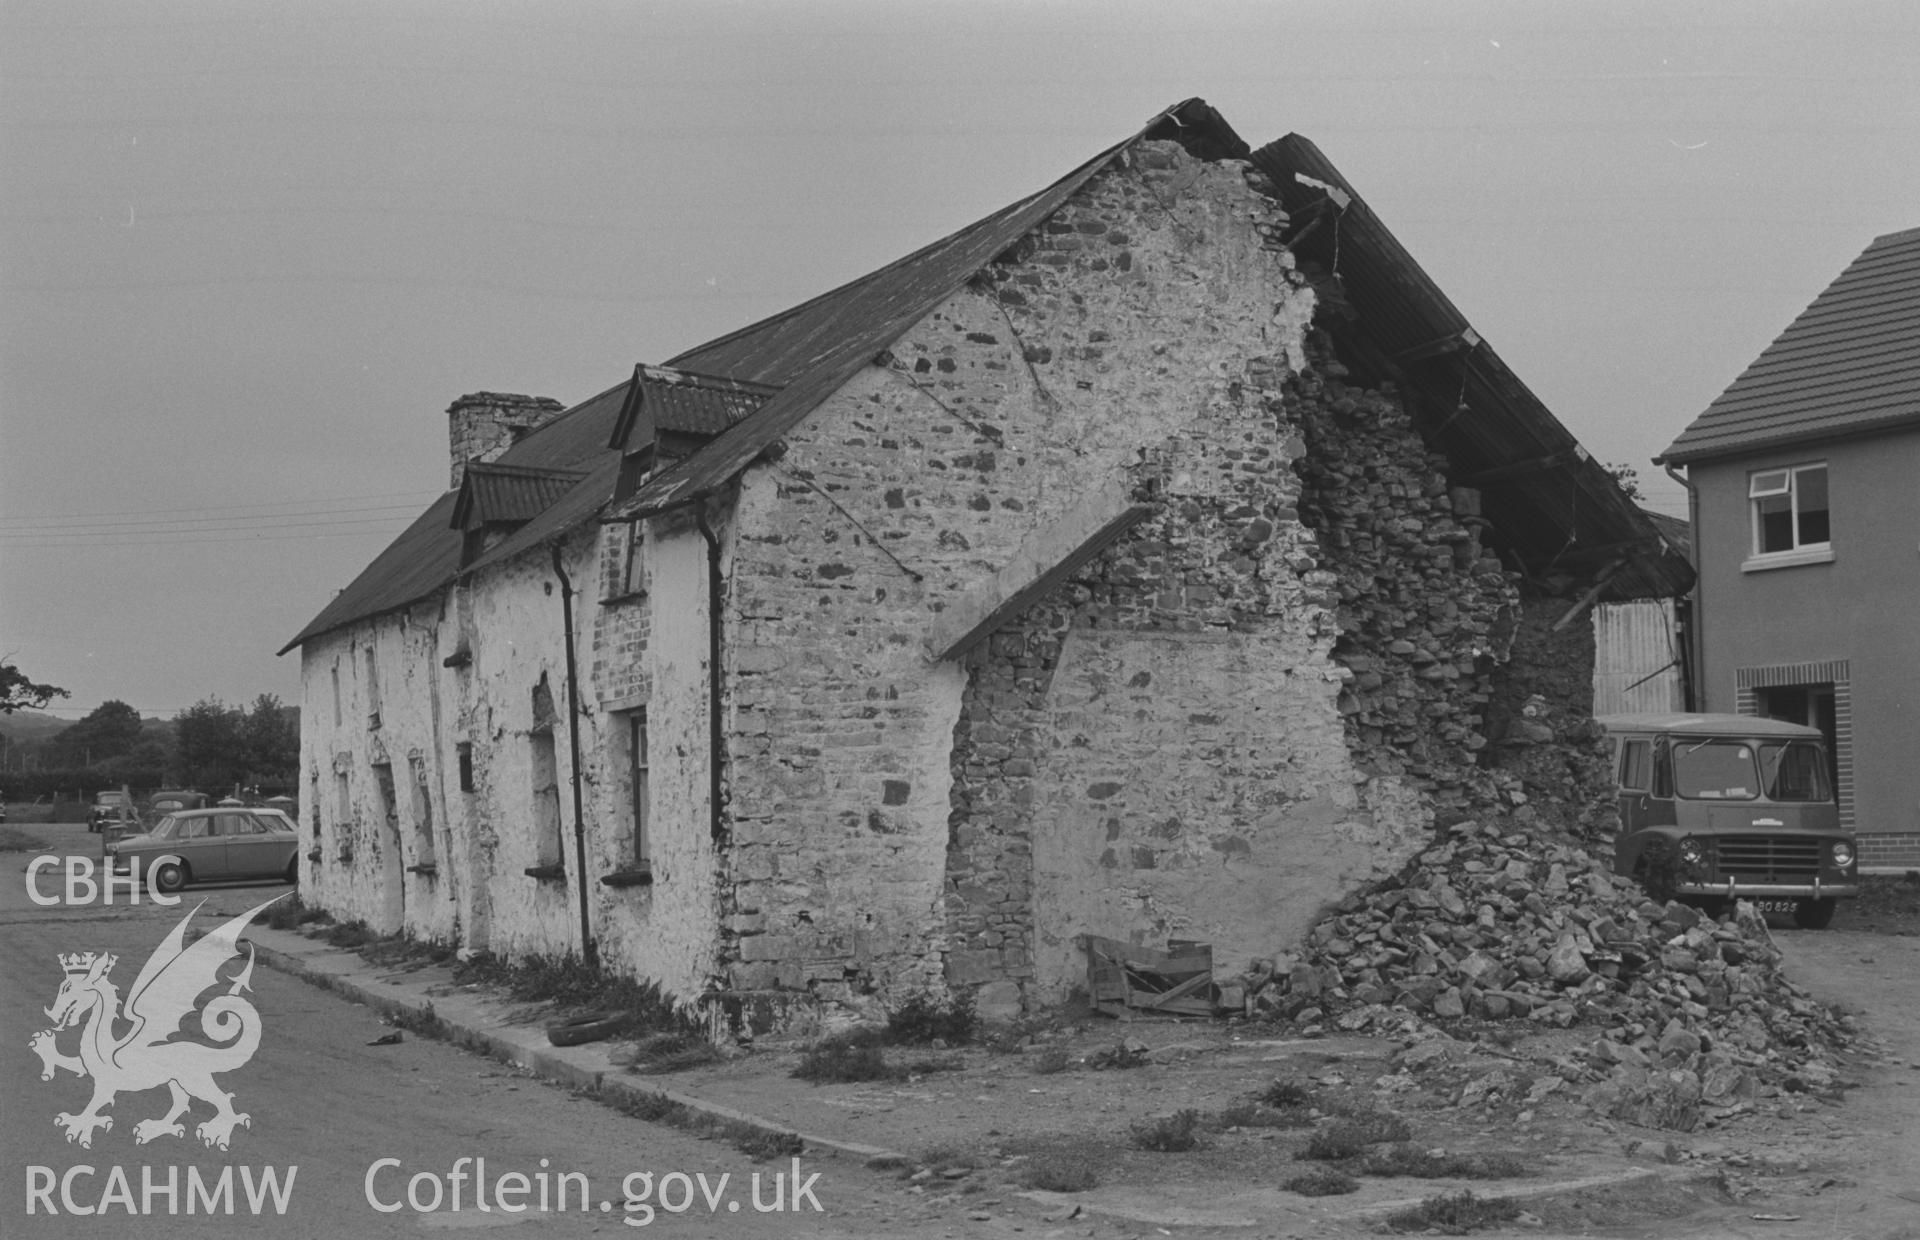 Digital copy of a black and white negative showing the old shop and cottages on the east side of the road at Talsarn, south east of Aberaeron. Photographed by Arthur O. Chater on 5th September 1966 looking north north east from Grid Reference SN 545 563.